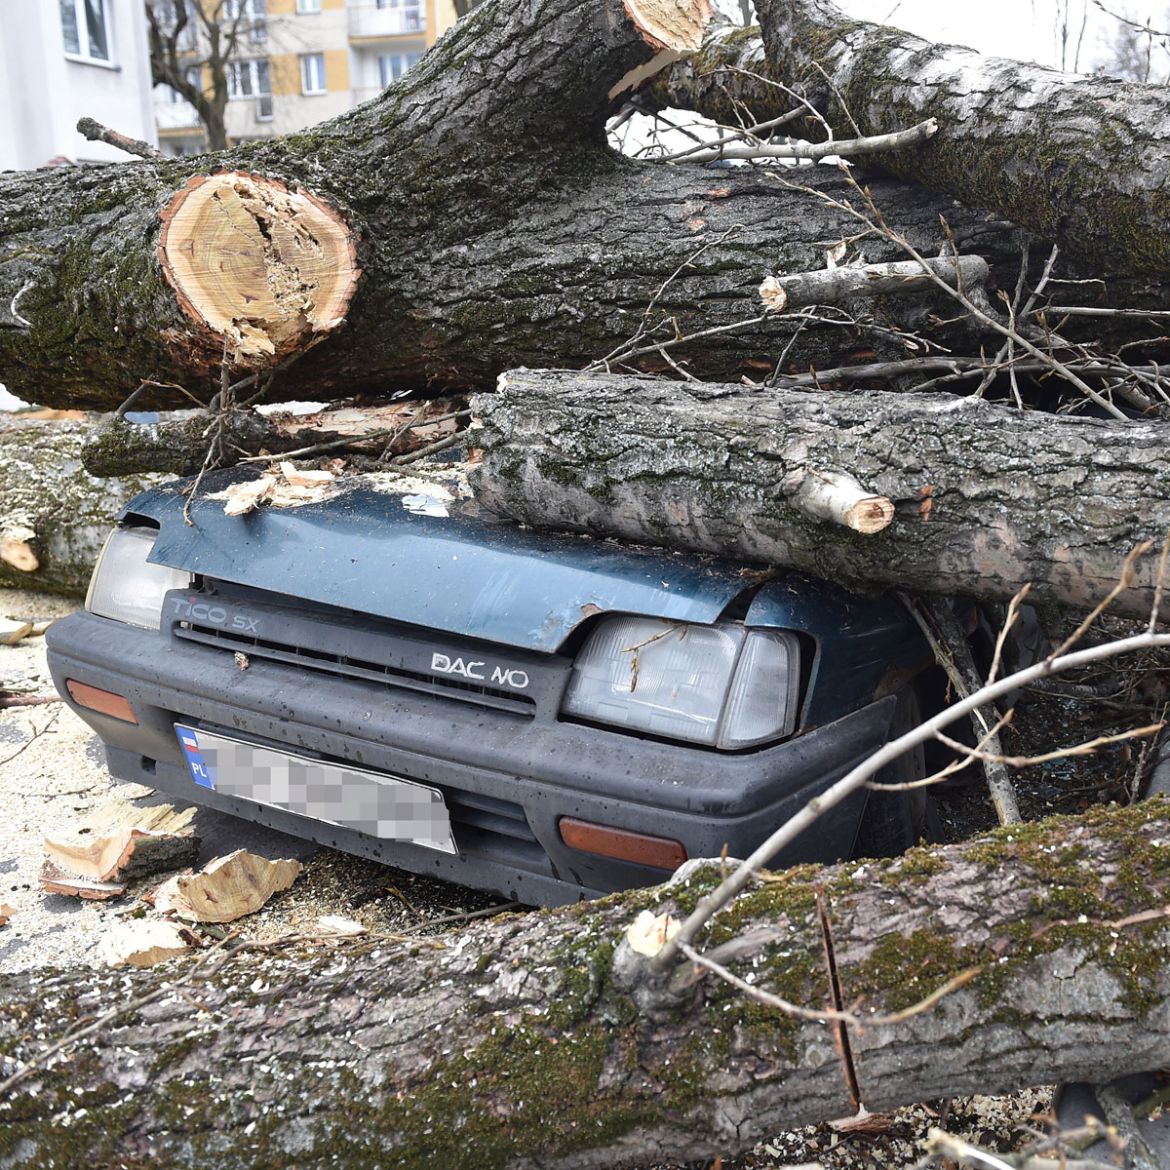 A car destroyed by a fallen tree in Krakow, Poland,as Storm Doris continues her destructive path through northern Europe.